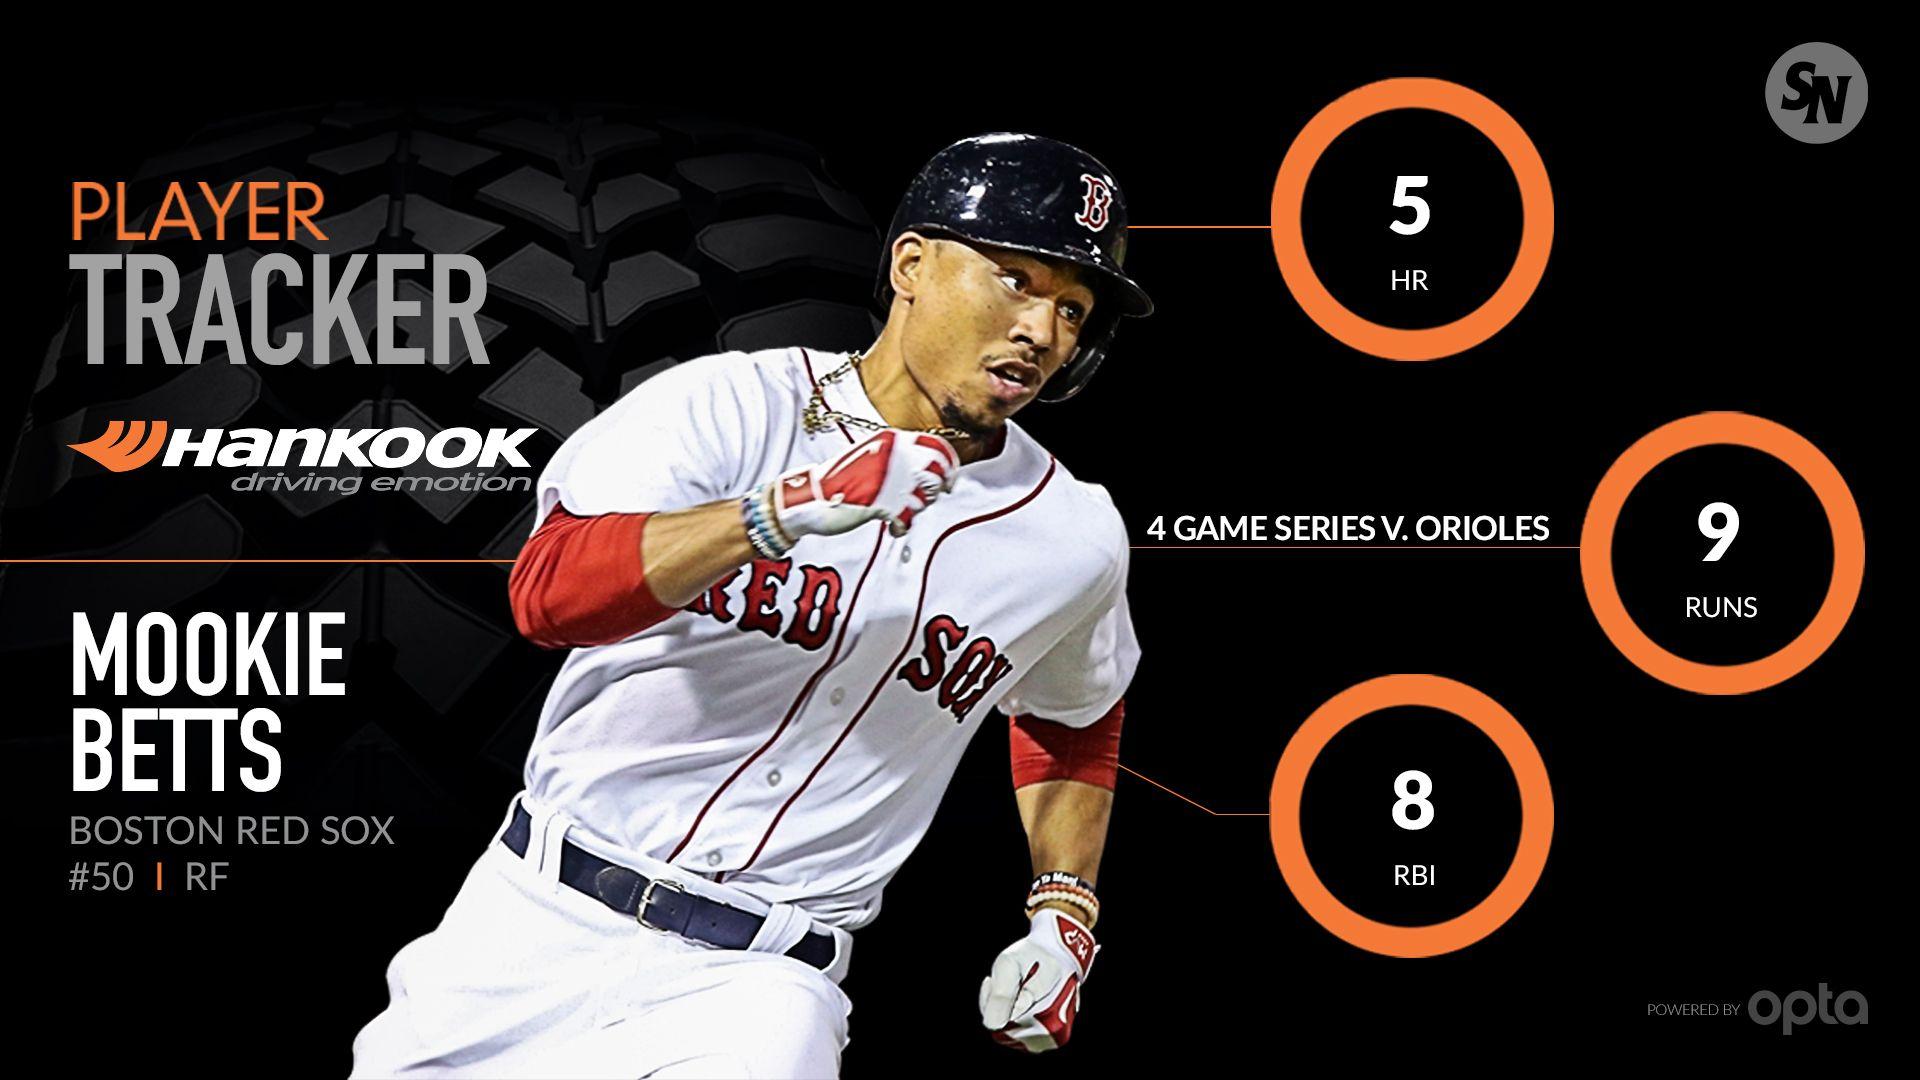 Mookie Betts' power outburst shines spotlight on Boston's young